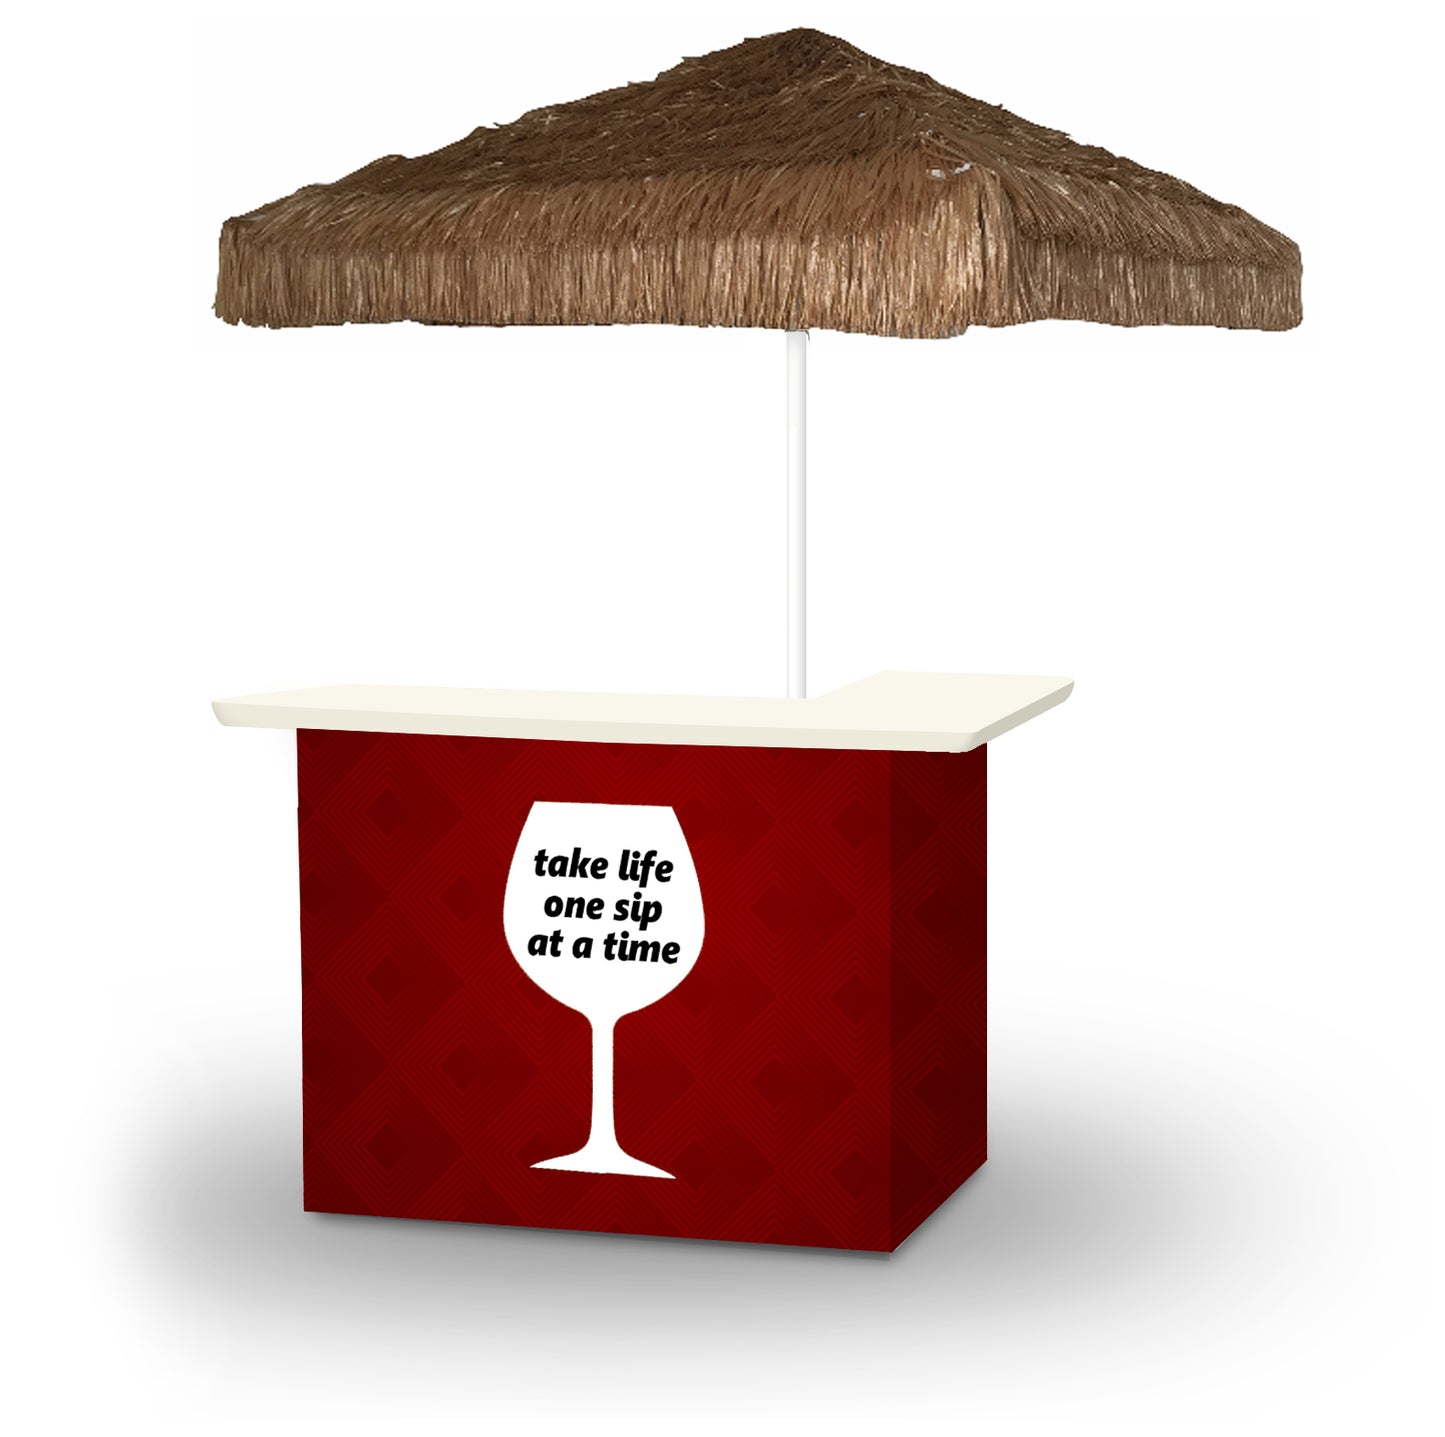 One Sip at a Time Portable Pop-Up Bar